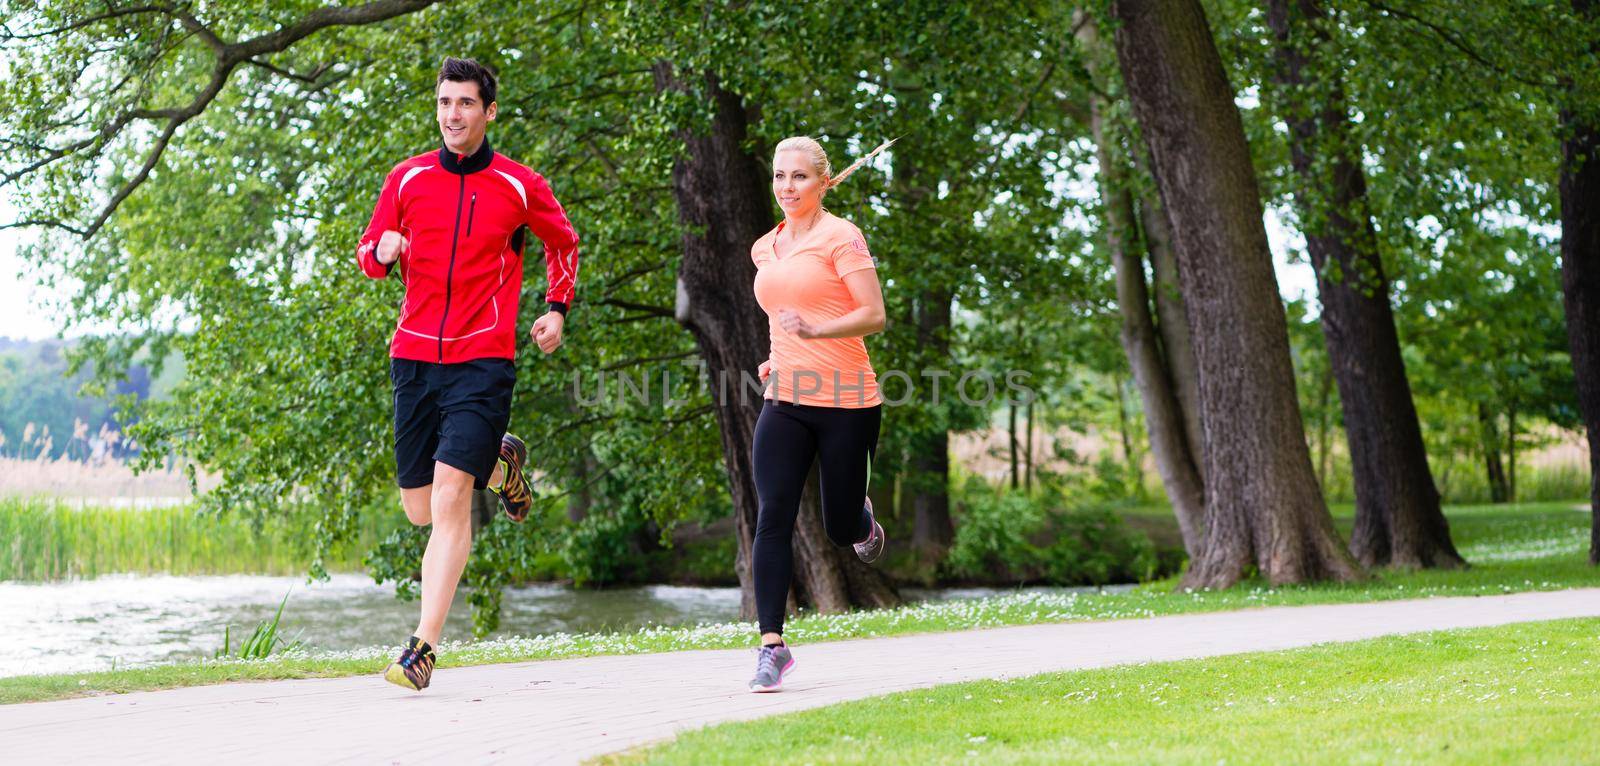 Woman and man jogging on dirt path in the woods together